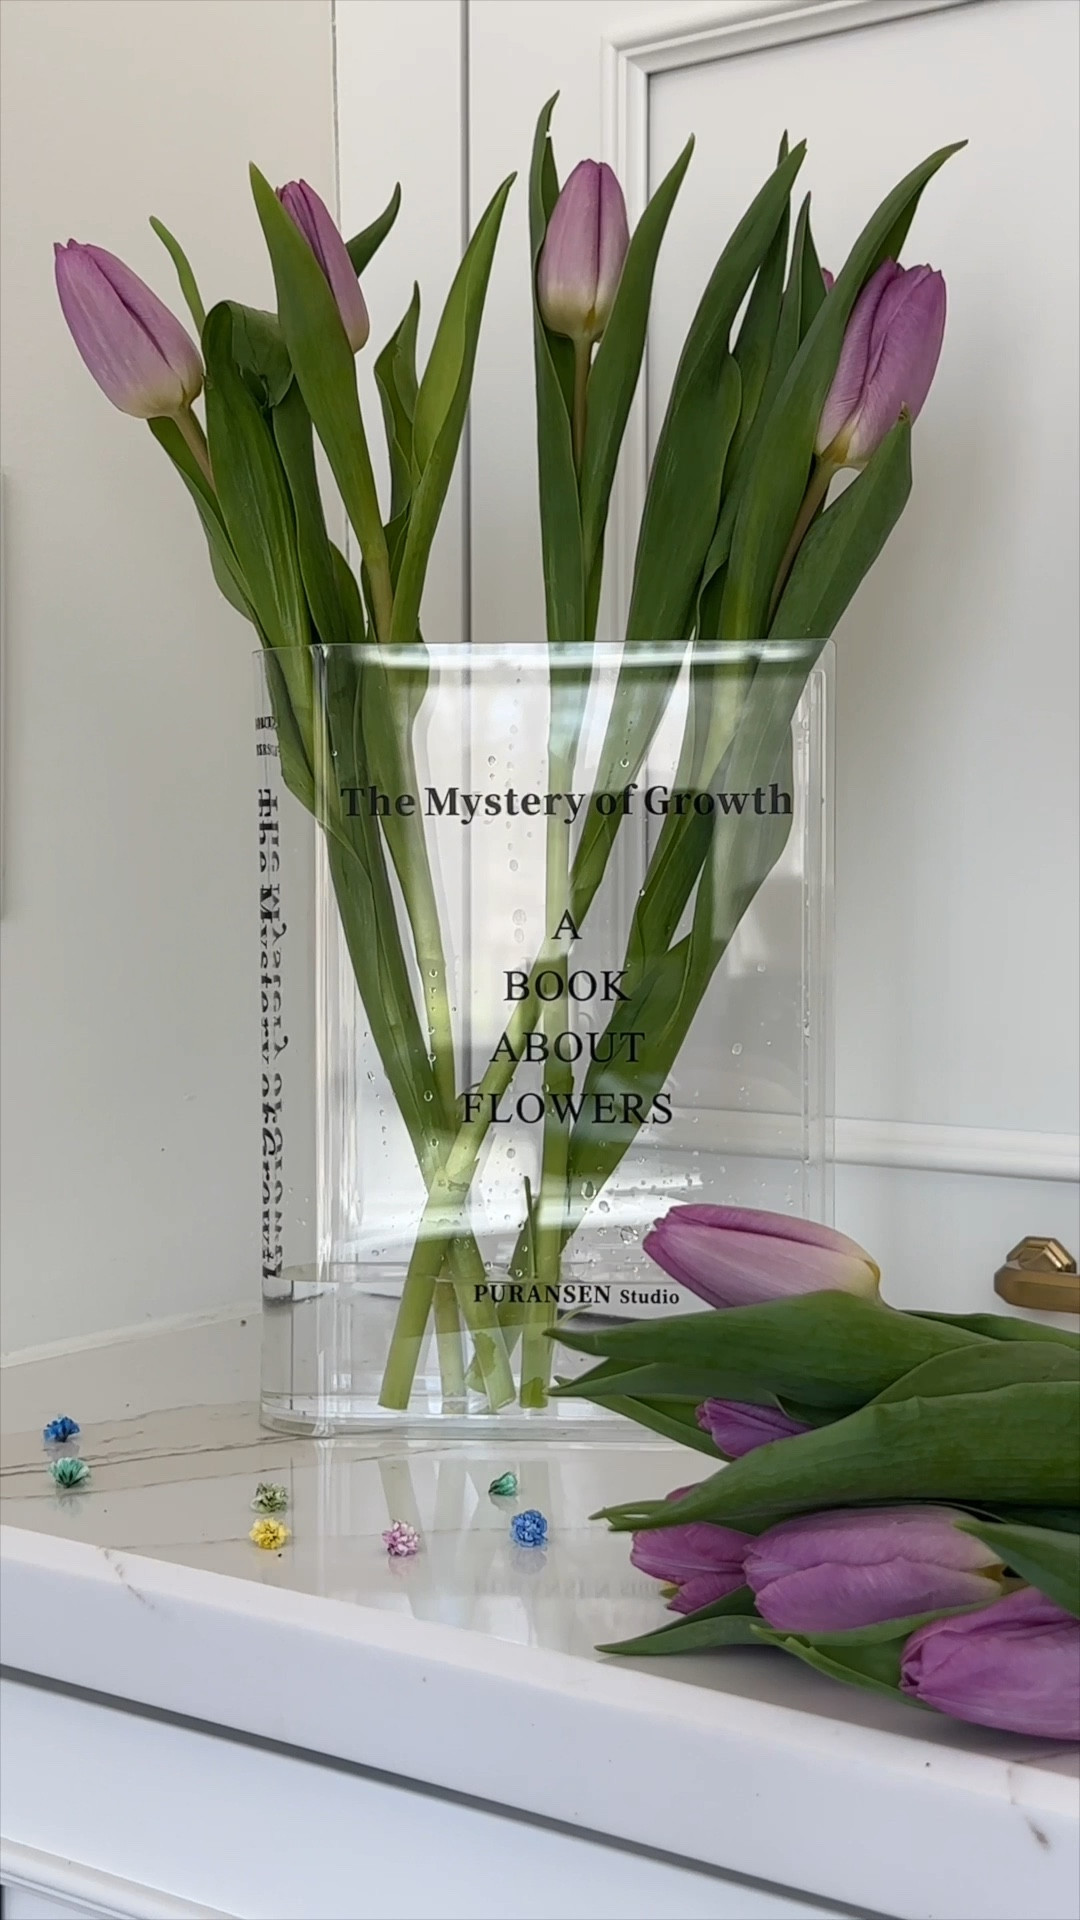 Puransen Book Vase for Flowers Aesthetic Room Decor, Artistic and Cultural Flavor Decorative Acrylic Vase, Unique Home/Bedroom/Office Accent, A Book